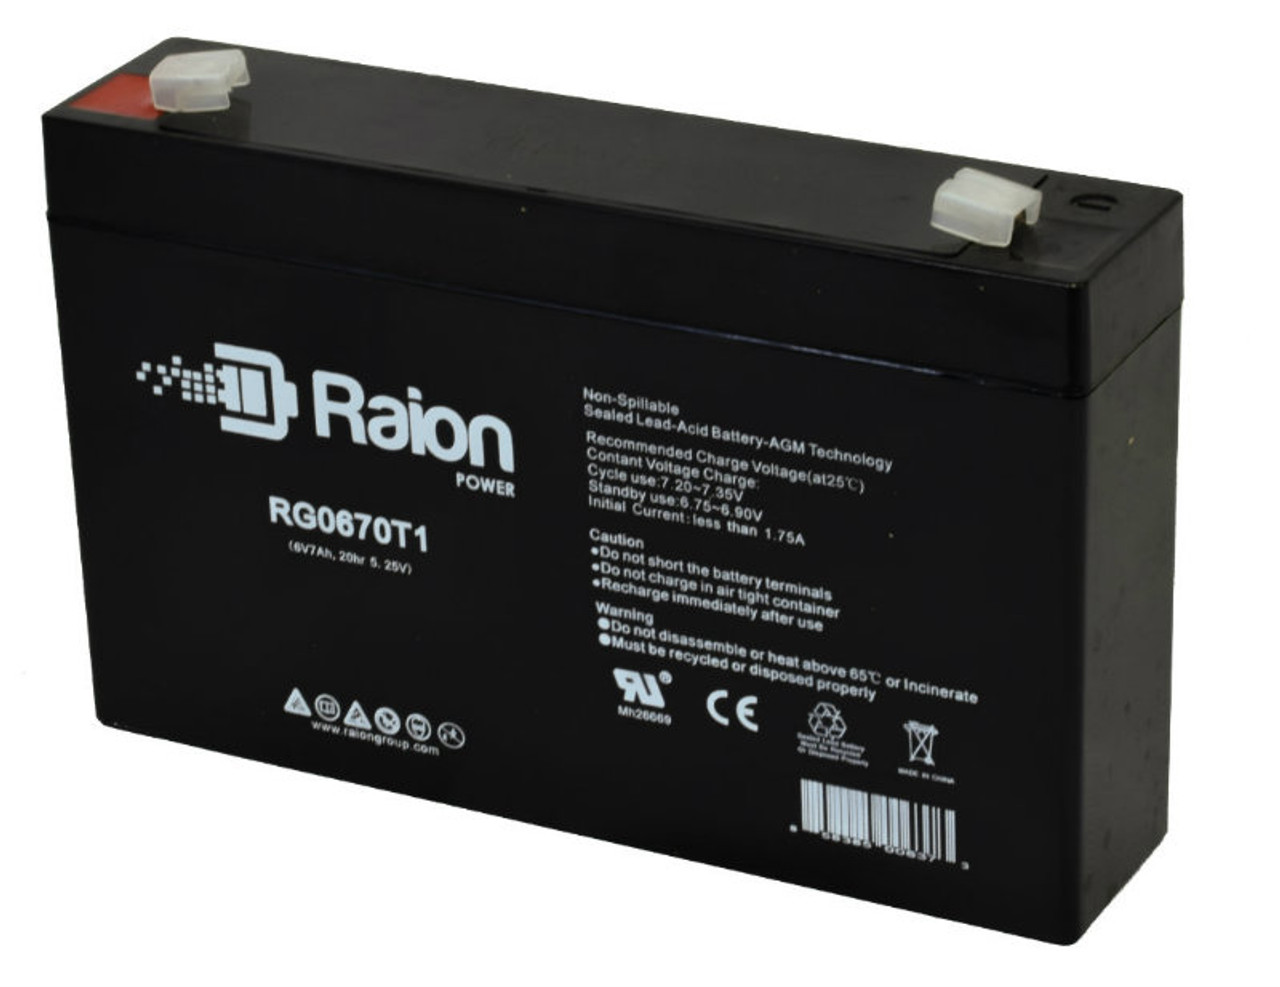 Raion Power RG0670T1 6V 7Ah Replacement Emergency Light Battery for Dual-Lite LM80I